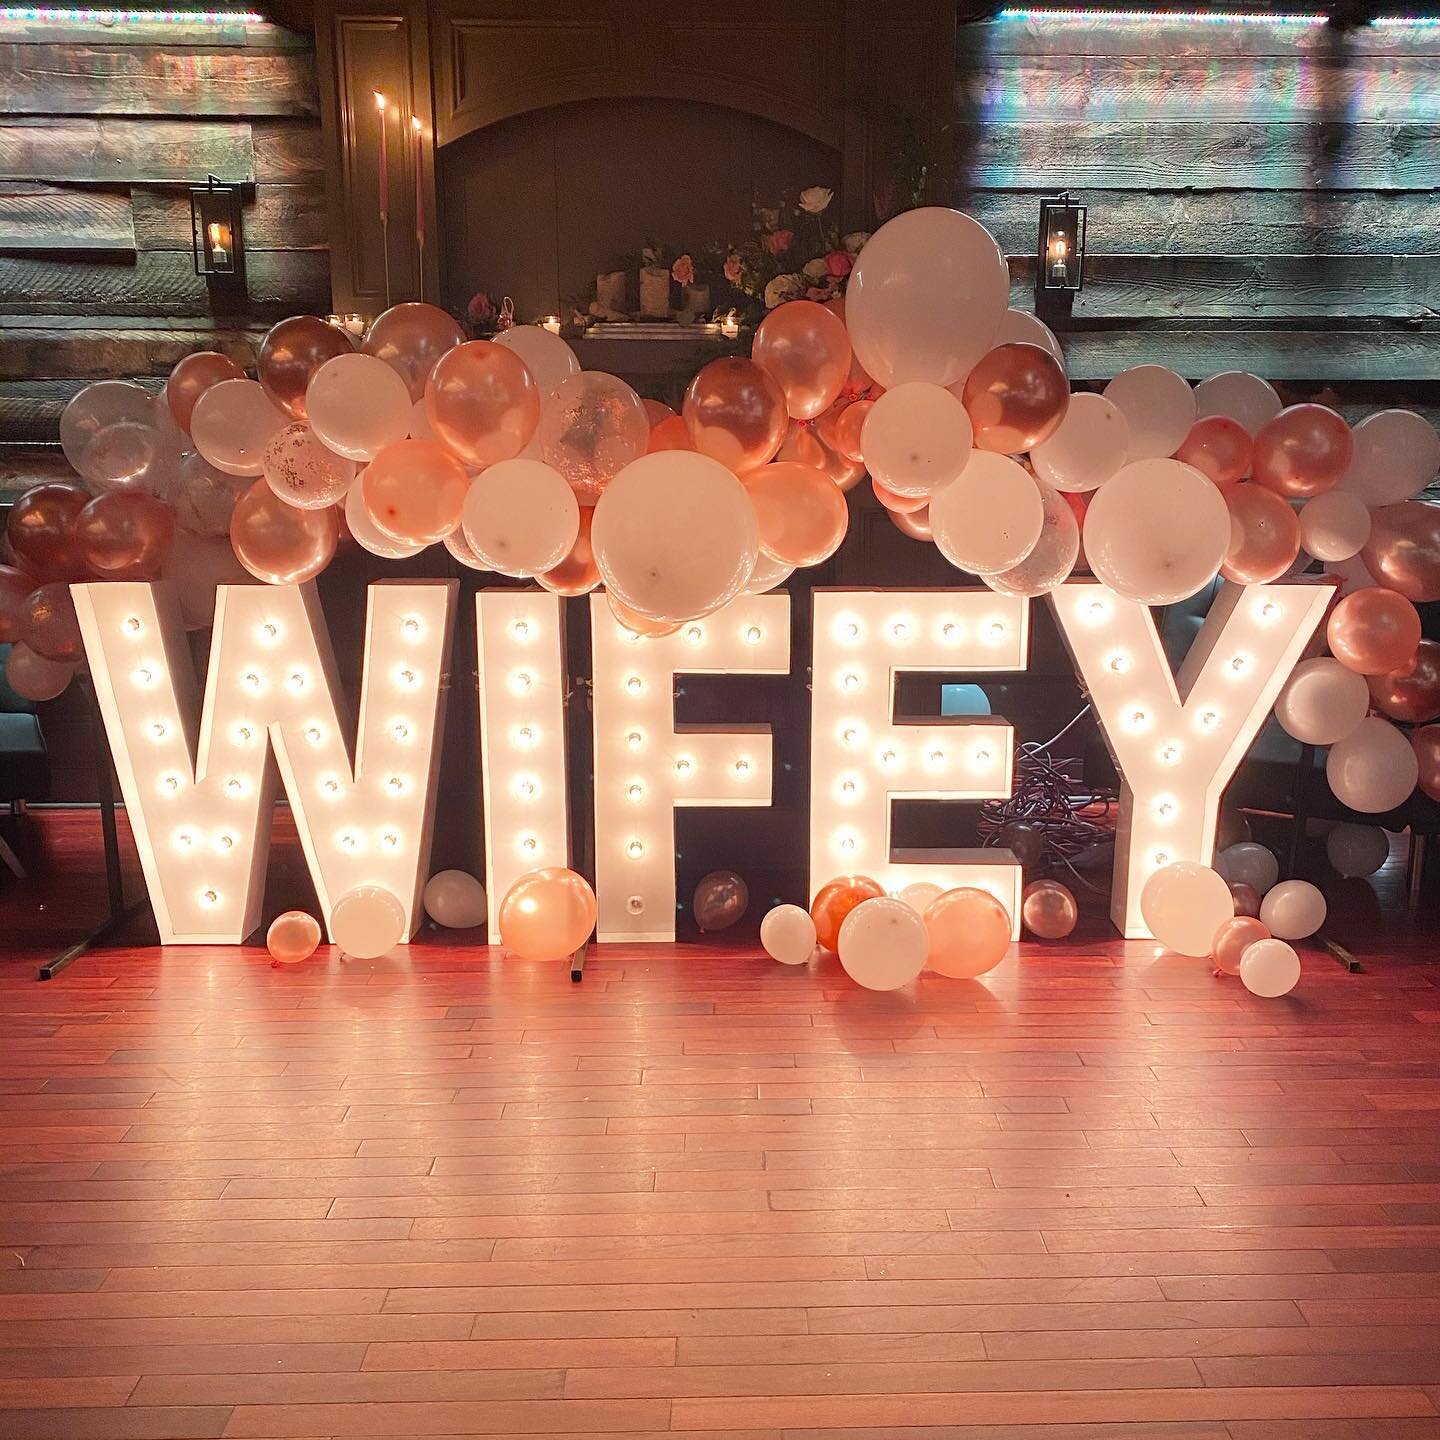 Alyssa&rsquo;s going to be a 🌟WIFEY🌟 

To inquire about your next event with 618, click the link in bio to schedule a tour ⬆️

618nj.com/specialevents